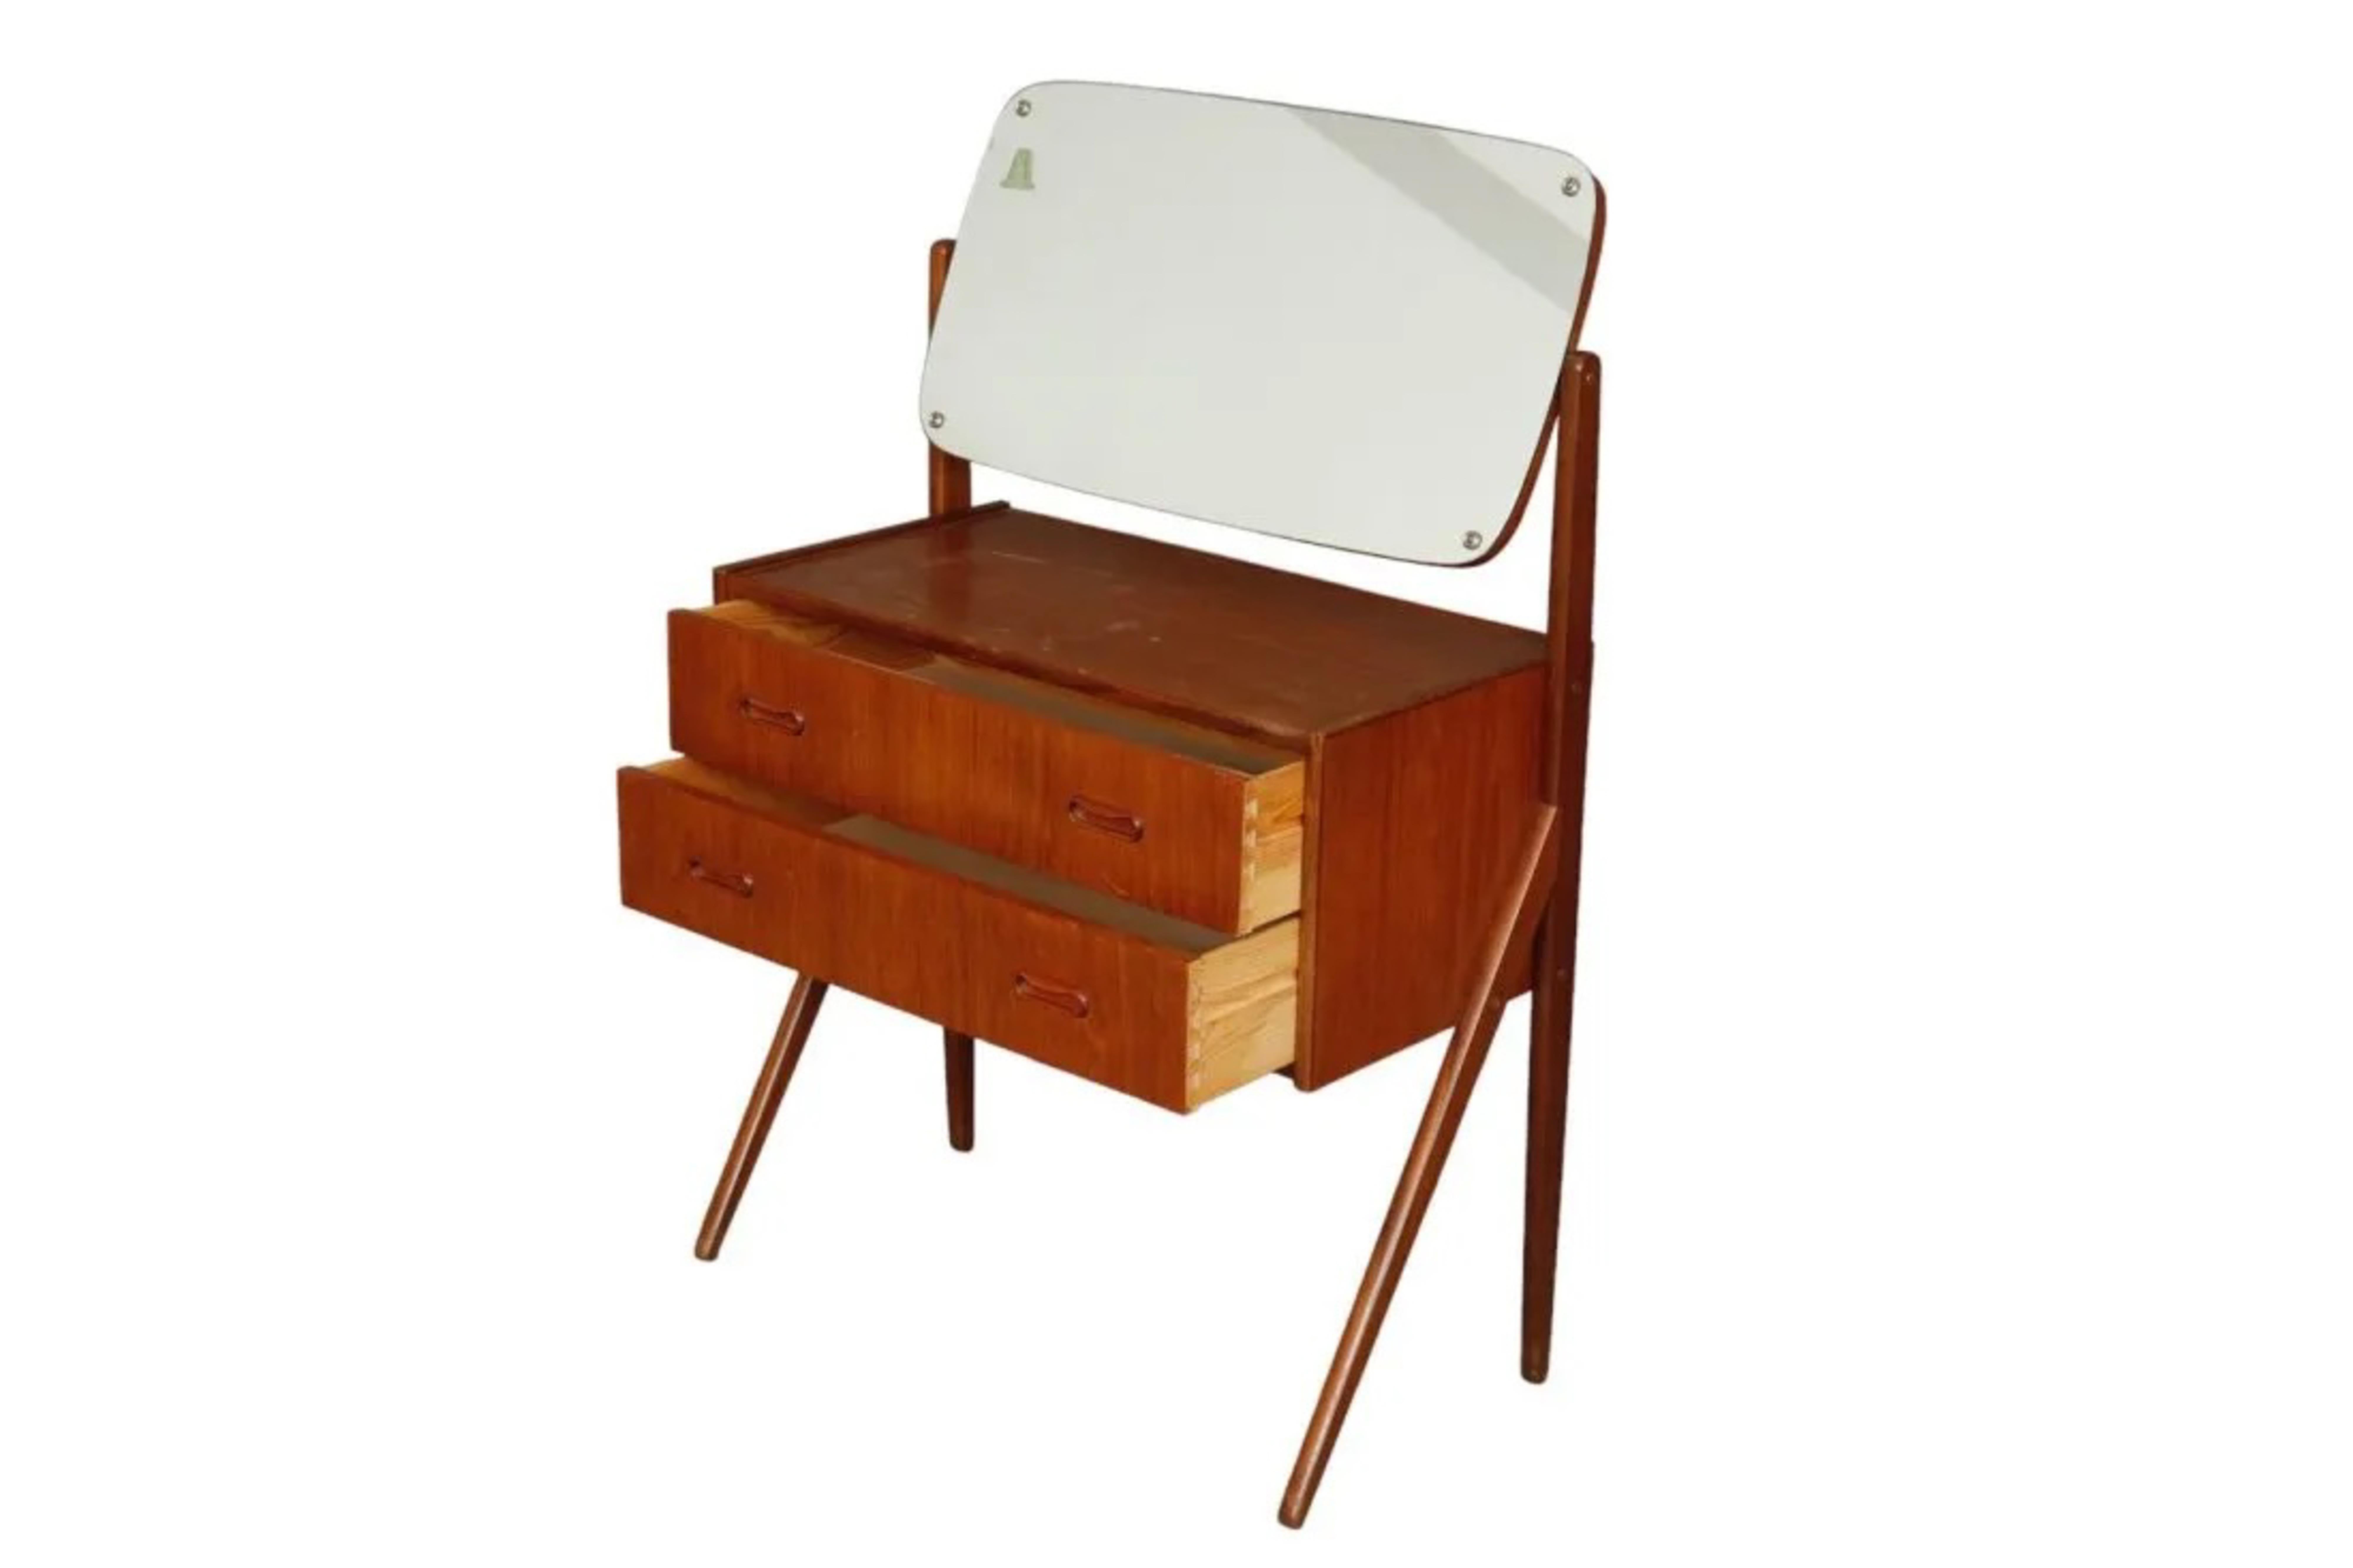 A 1960s Danish Y-leg vanity with mirror in the style of Sigfred Omann for Olholm Mobelfabrik 

Made of teak with two dovetailed drawers that open with recessed handles.

Dimensions:
W27” x D14.5” x H42” 
with mirror Dresser height: 26.5”

very good